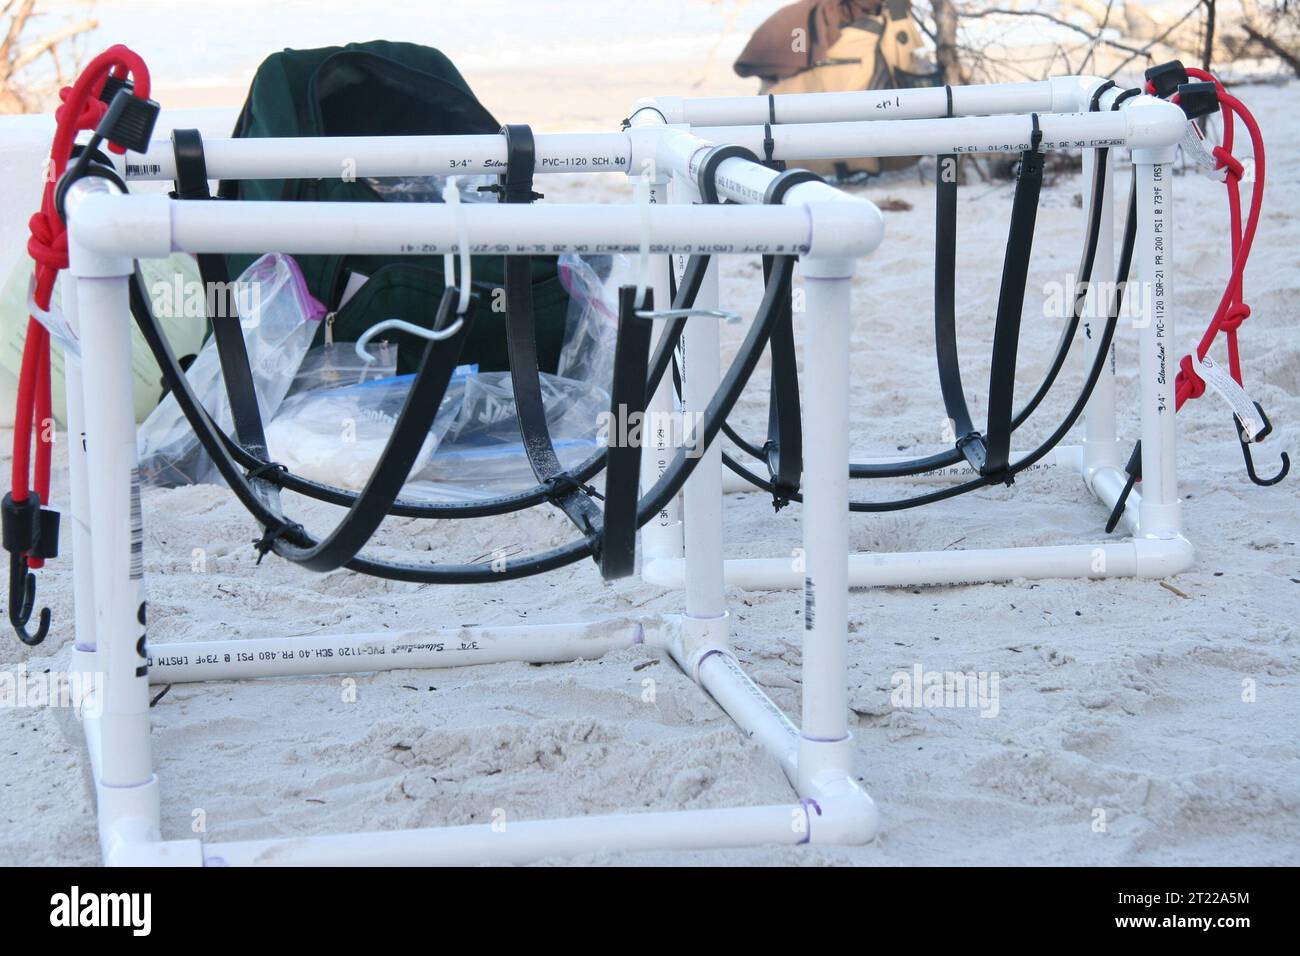 Port St. Joe, FL: Specially designed contraptions used to carry sea turtle eggs that have been placed in Styrofoam coolers. Subjects: Deepwater Horizon Oil Spill; Relocation; Reptiles; Volunteers. Location: Florida. Stock Photo